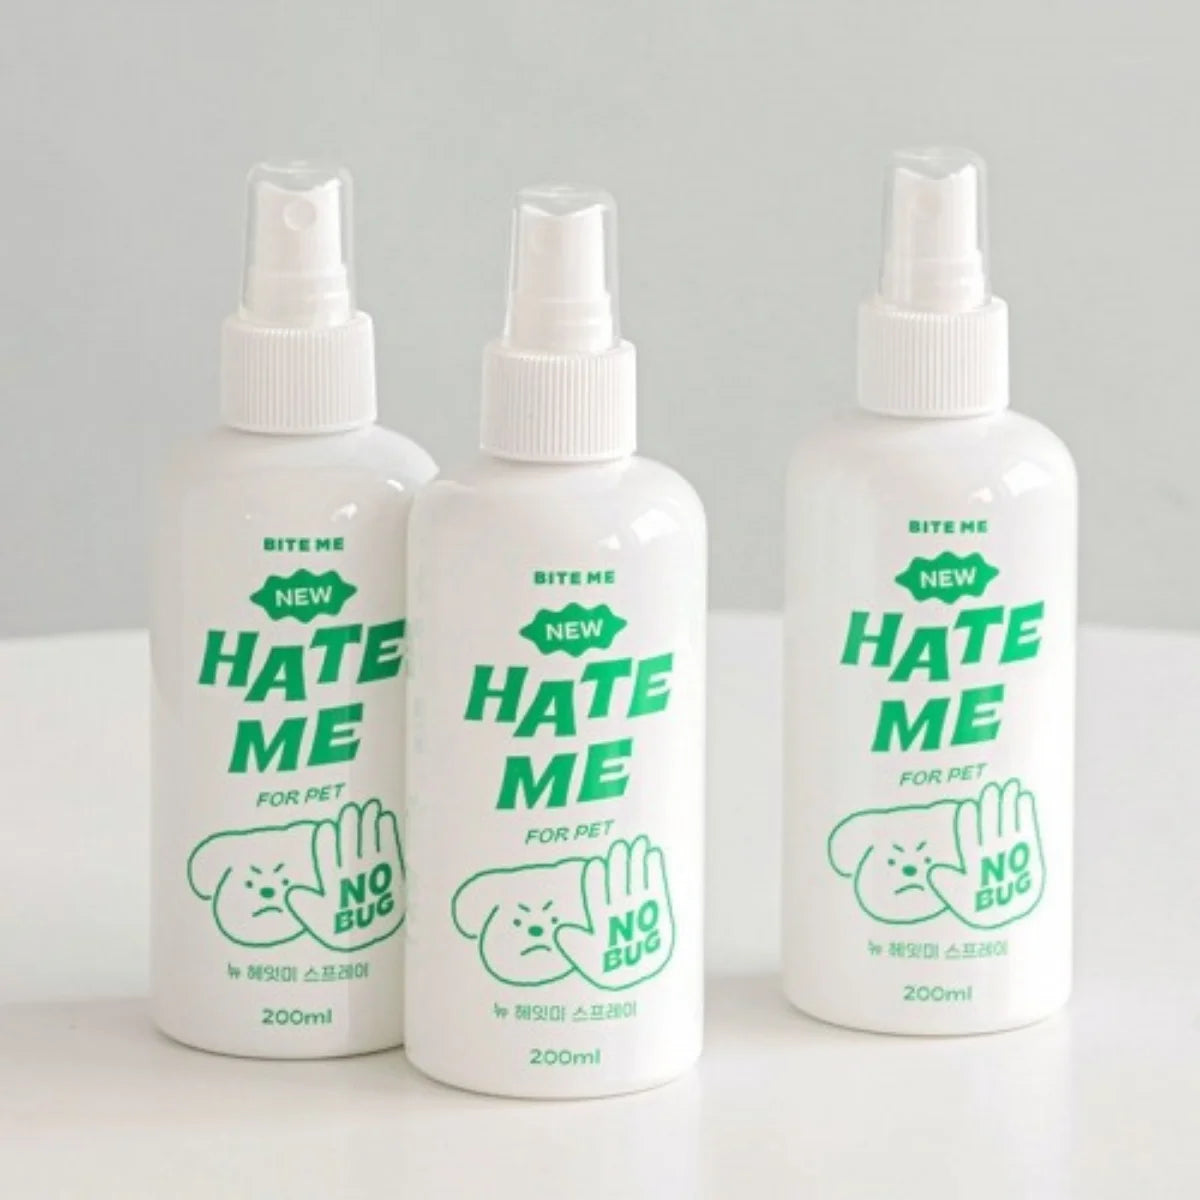 Bite Me - Hate Me Insect Repellent Spray 200ml